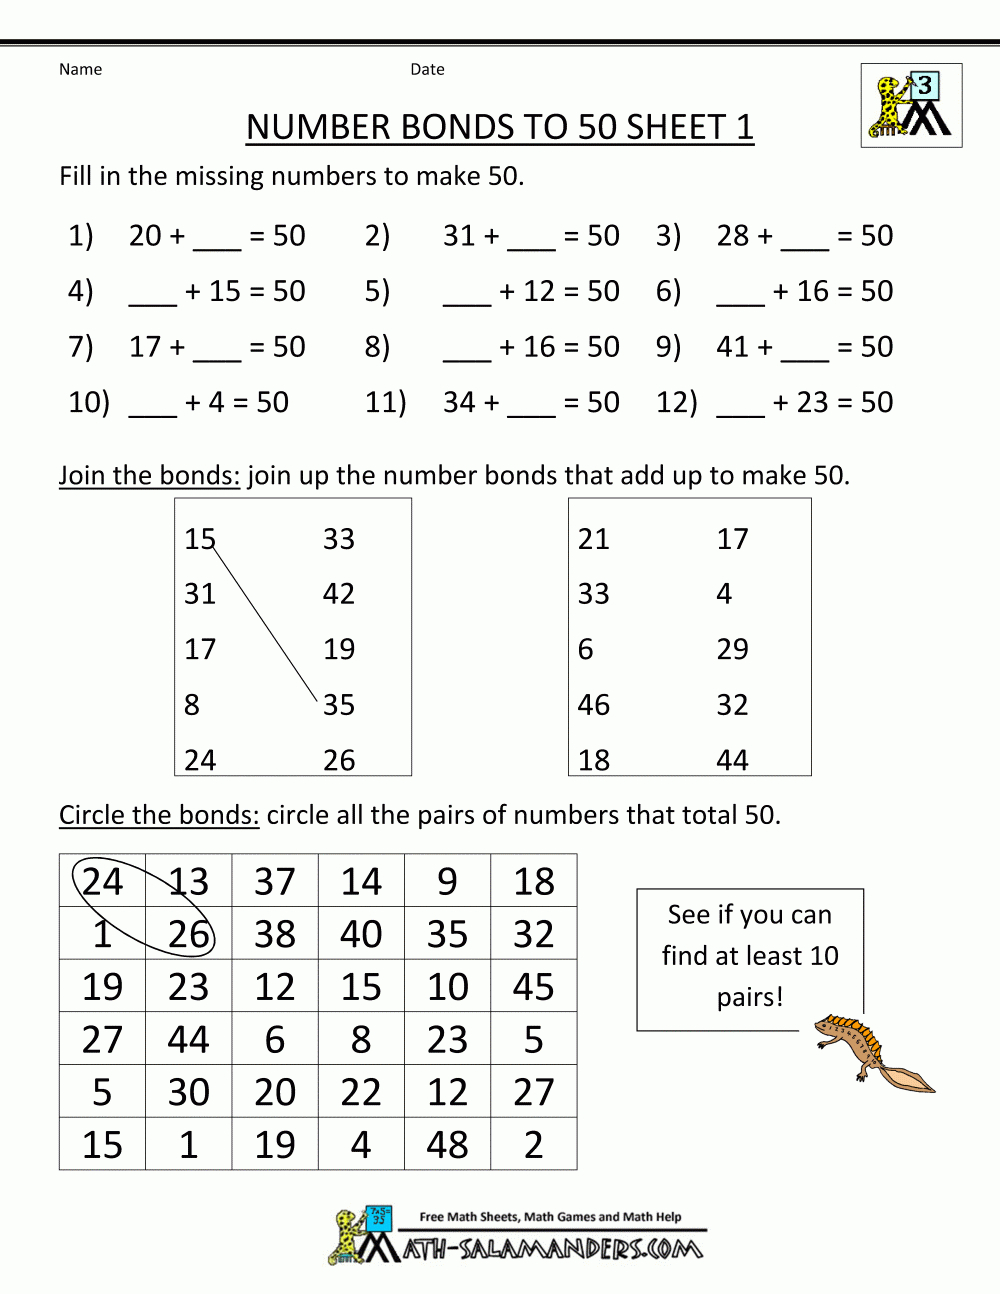 Free Math Worksheets Number Bonds To 50 1 | New | Number Bonds - Free Printable Number Bond Template